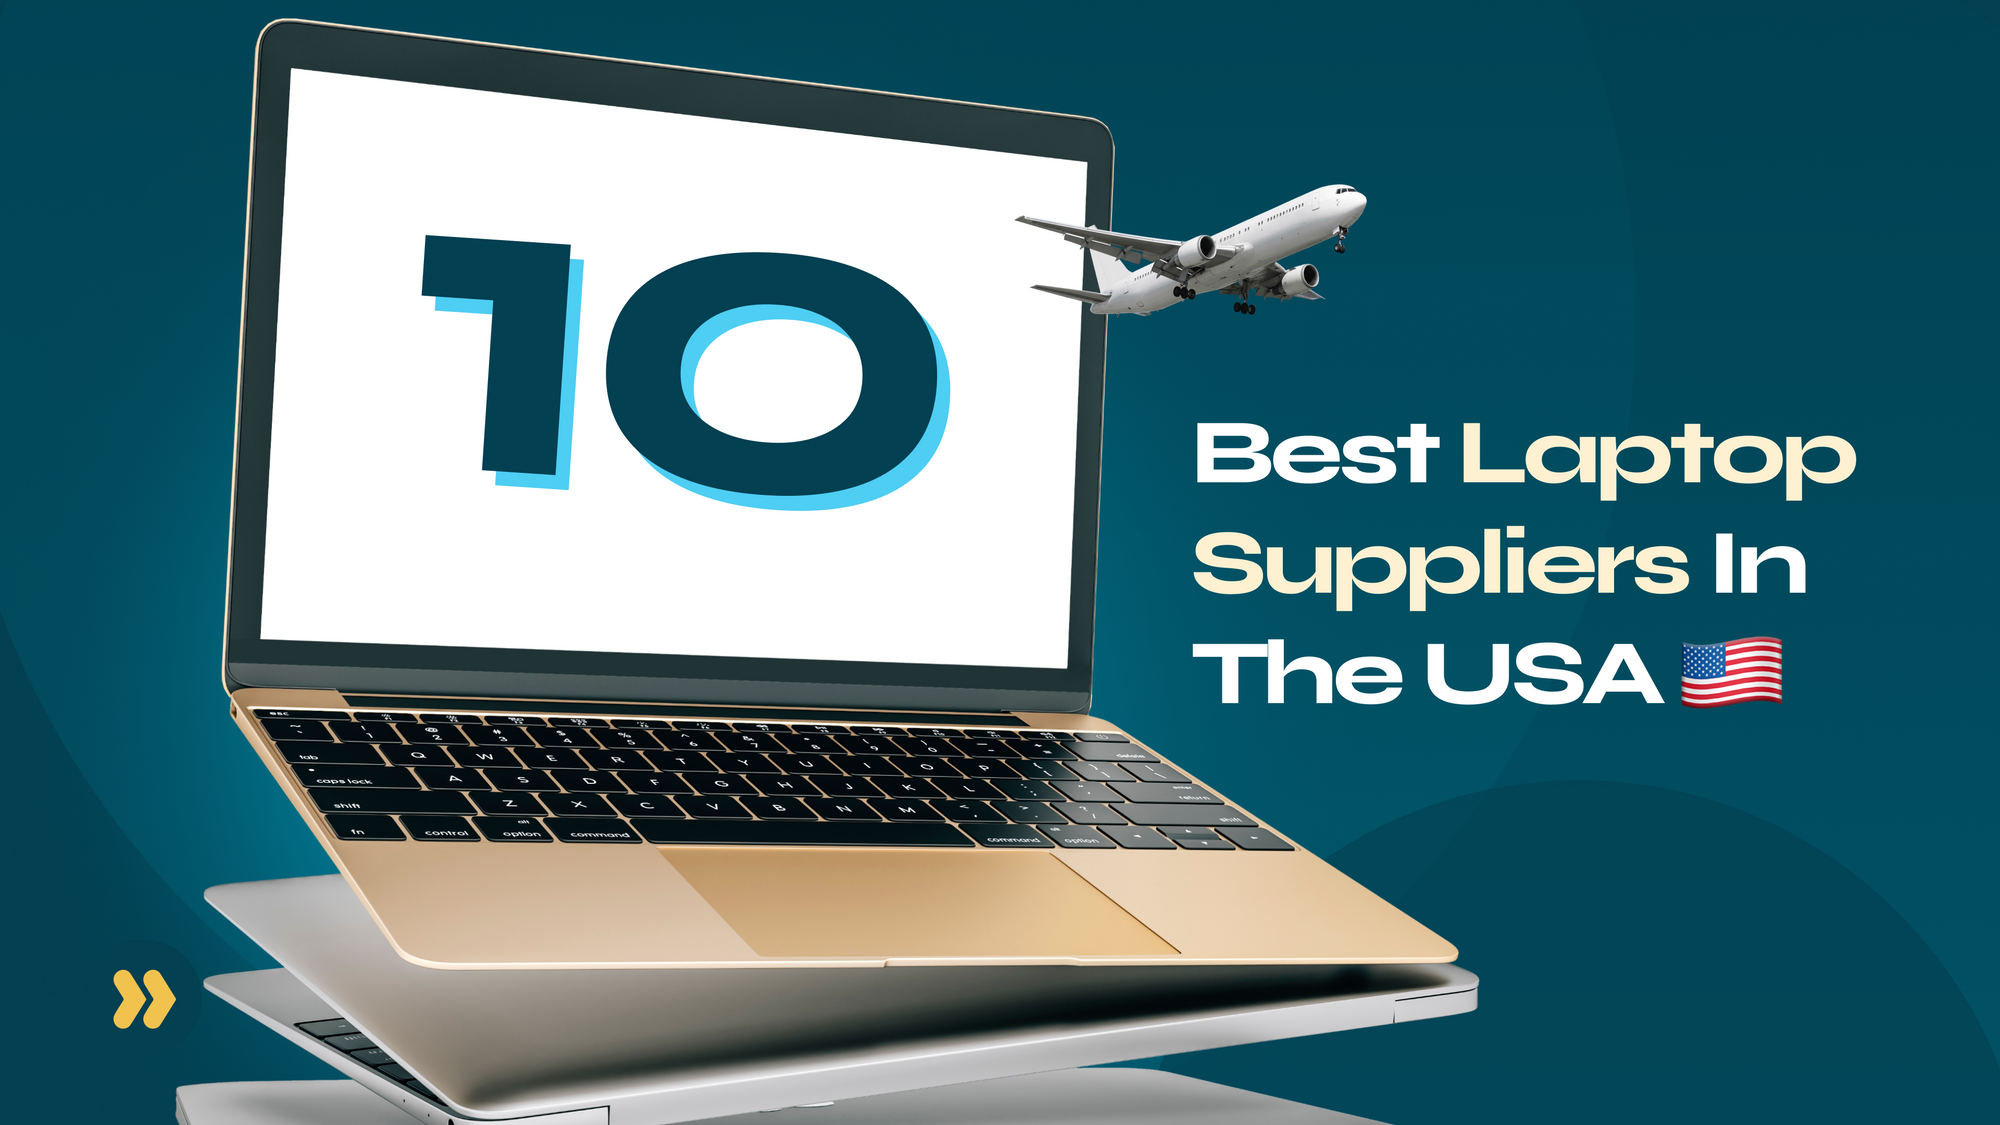 Top 10 Laptop Suppliers in the USA